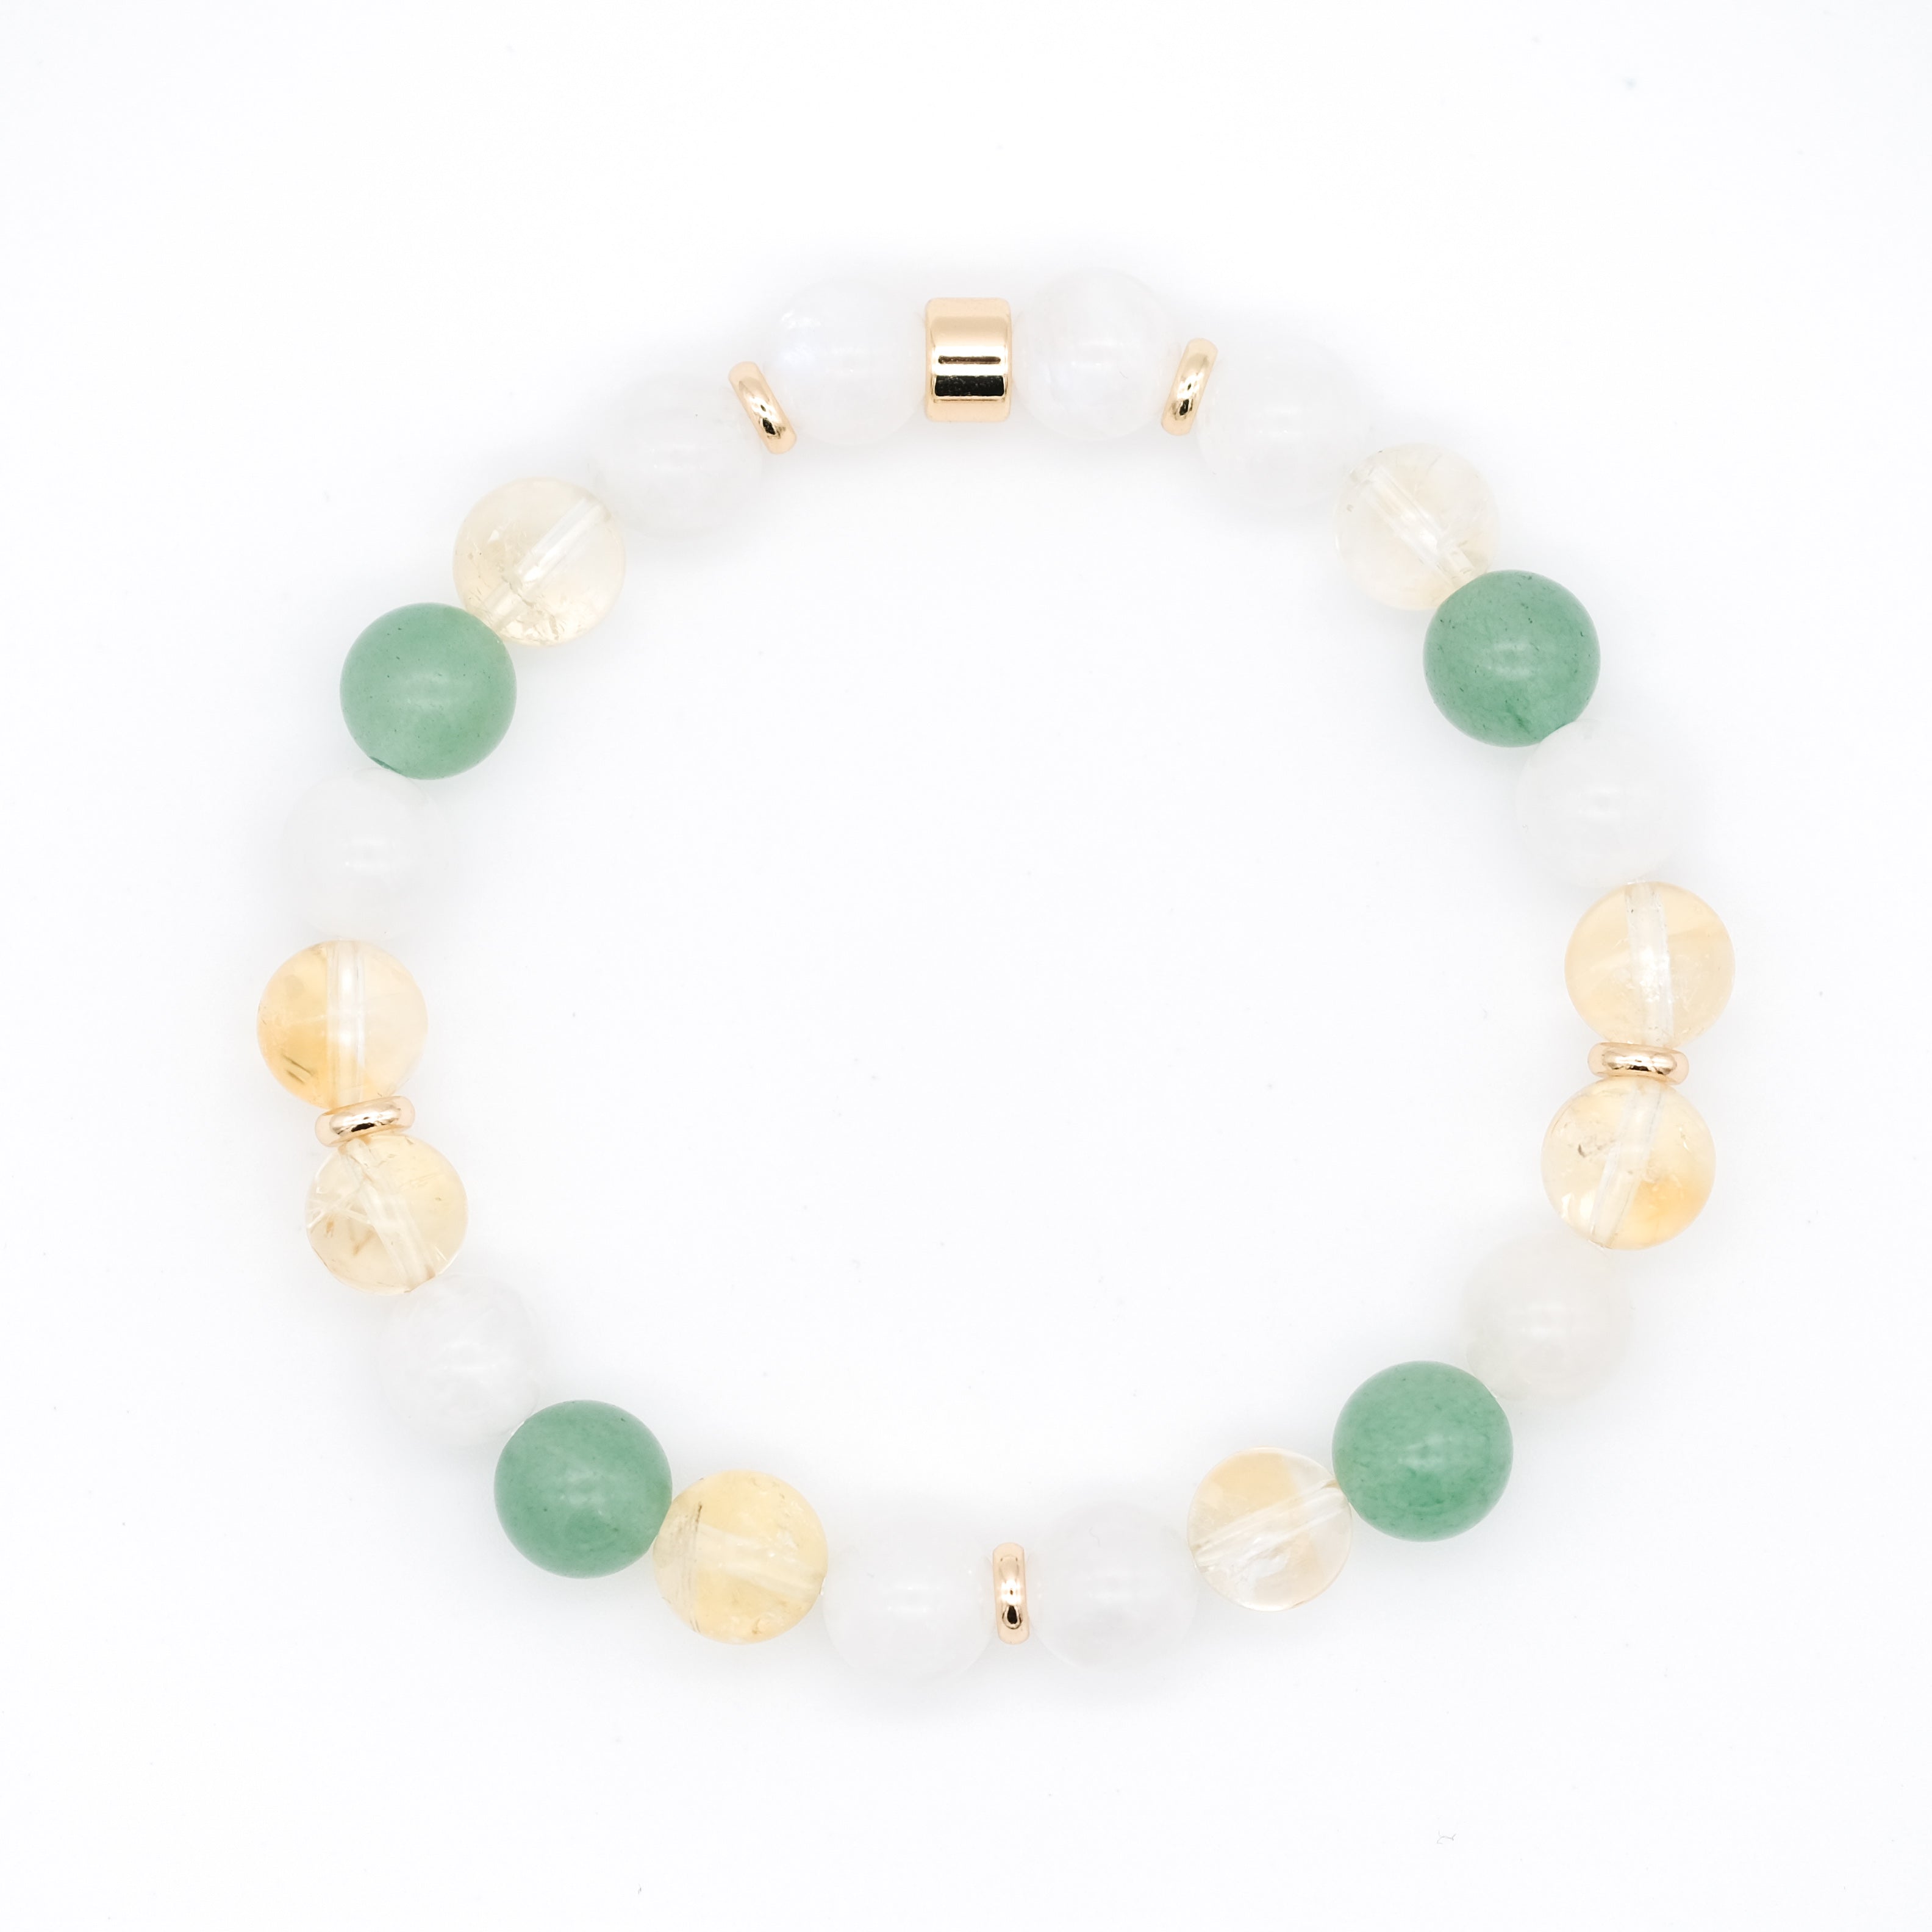 An aventurine, moonstone and citrine gemstone bracelet with gold accessories from above